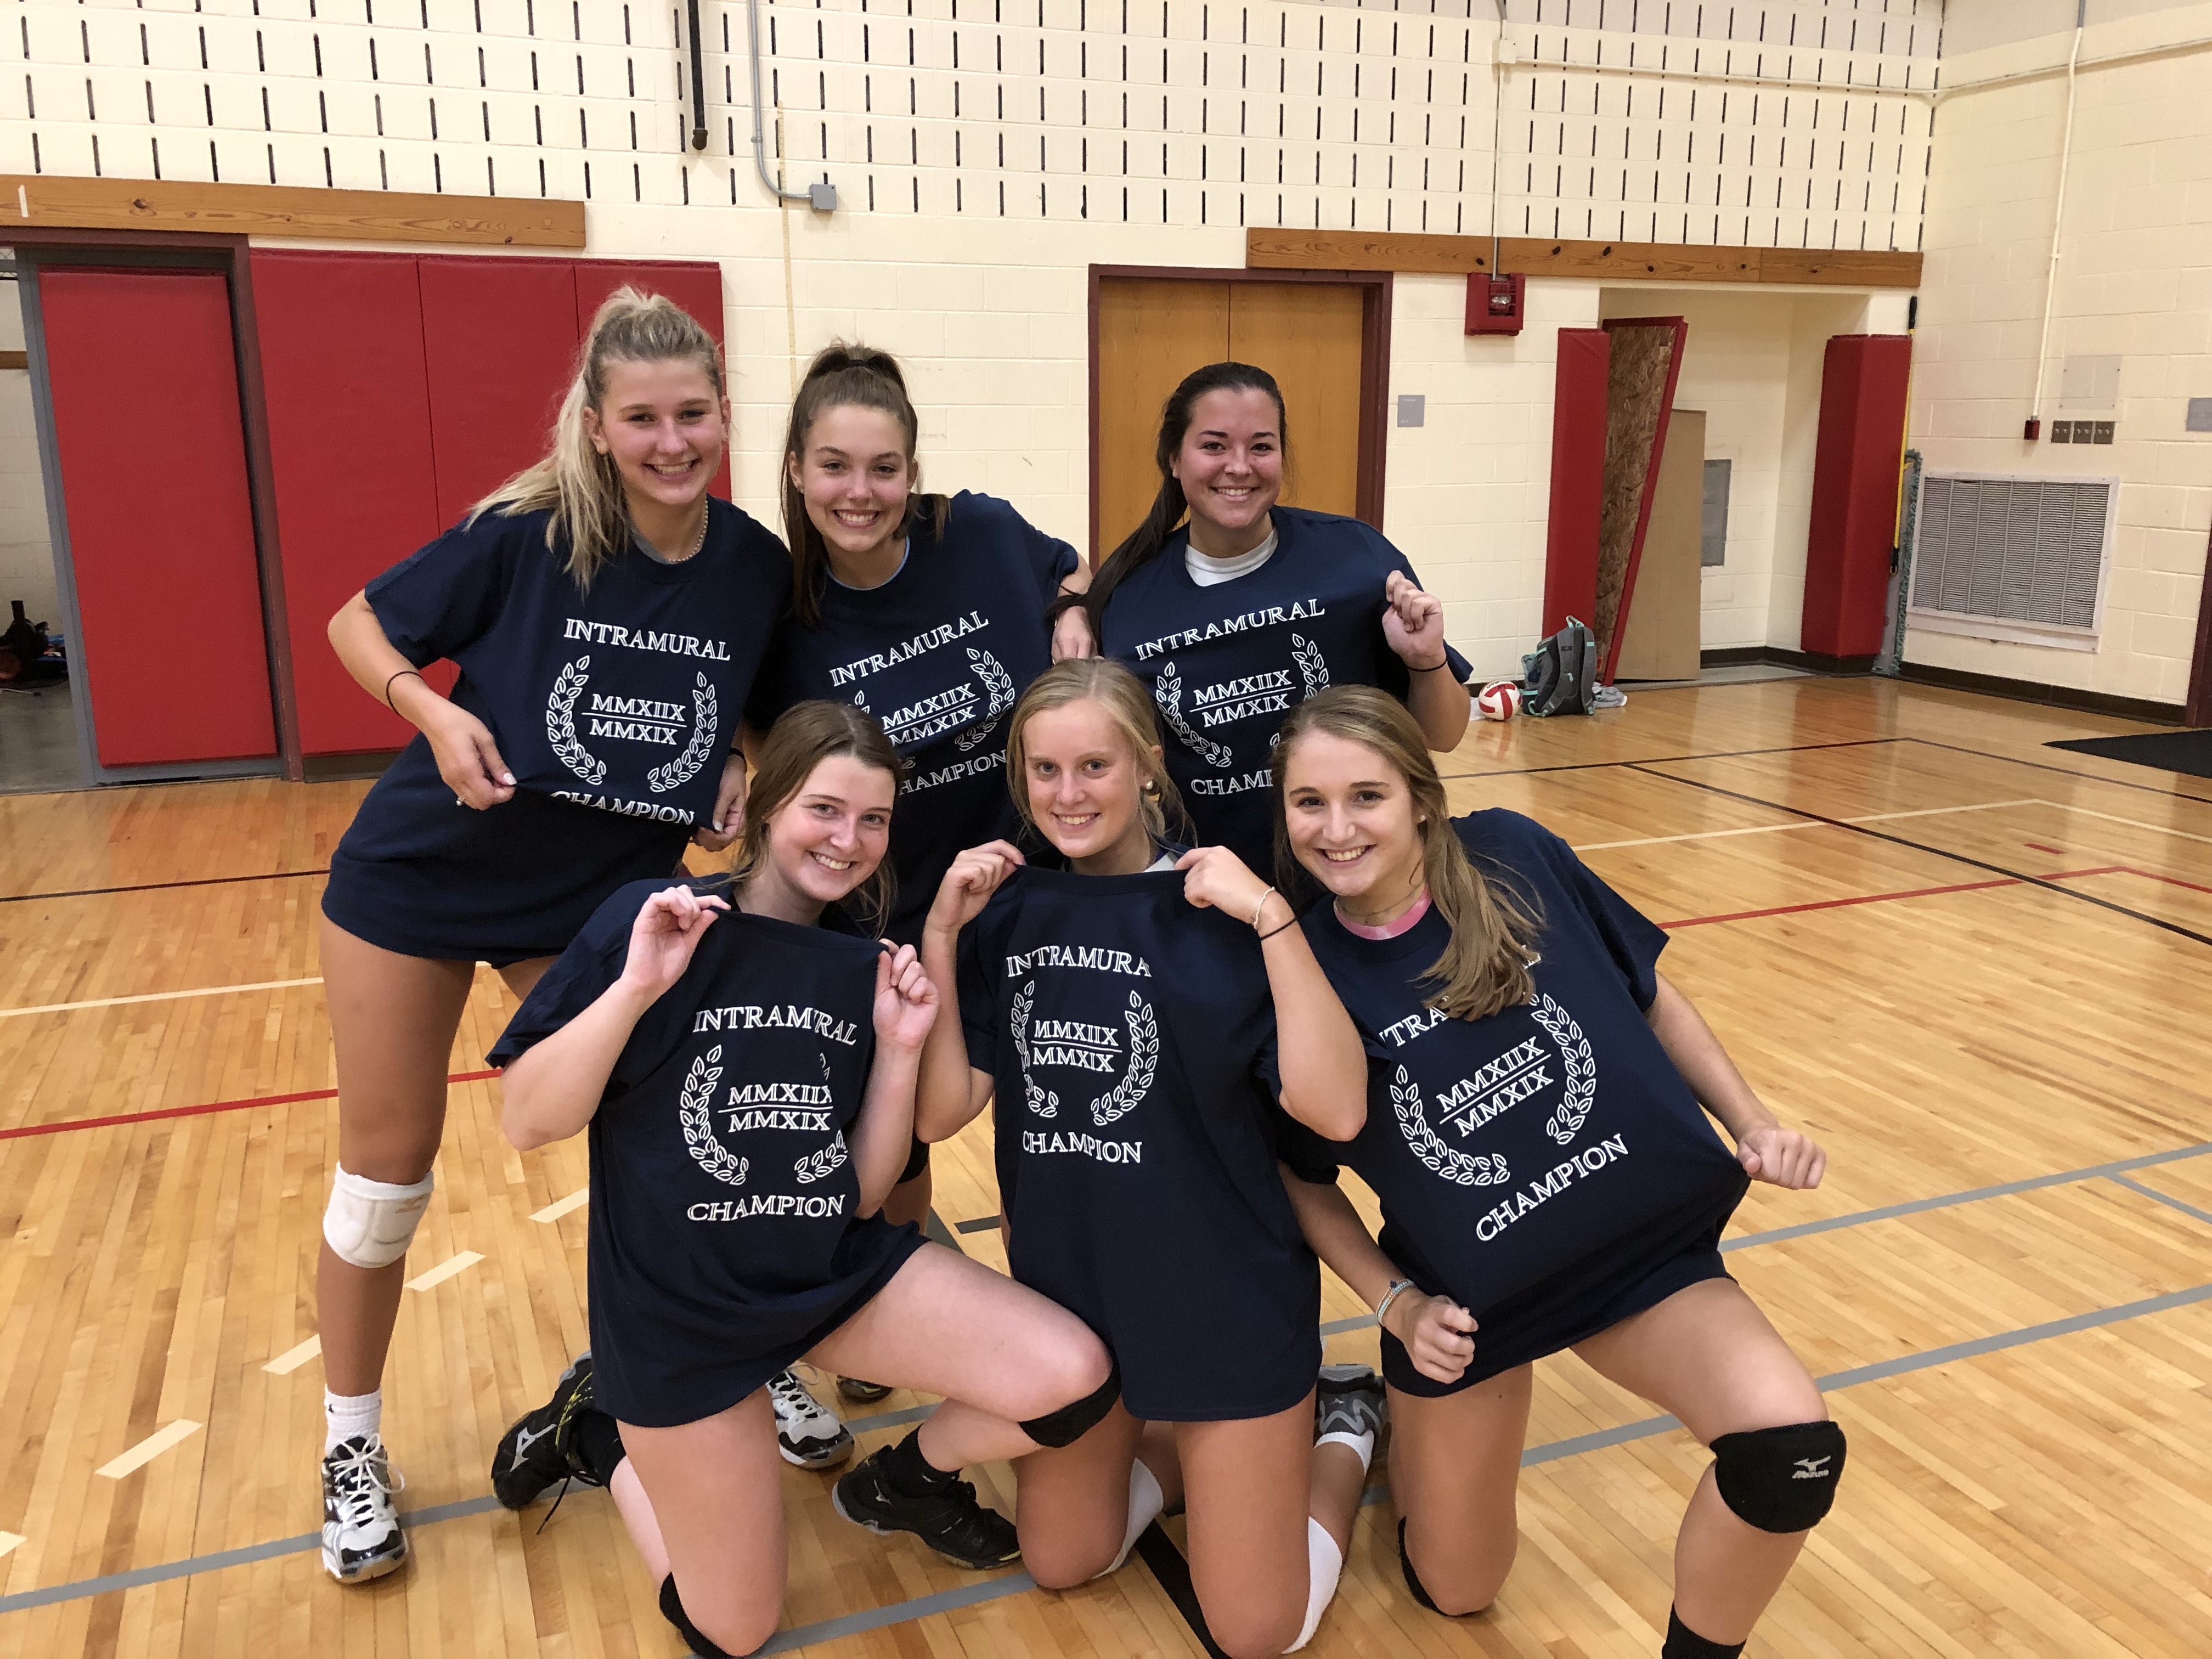 Women's volleyball league champion team poses together wearing their intramural shirts.